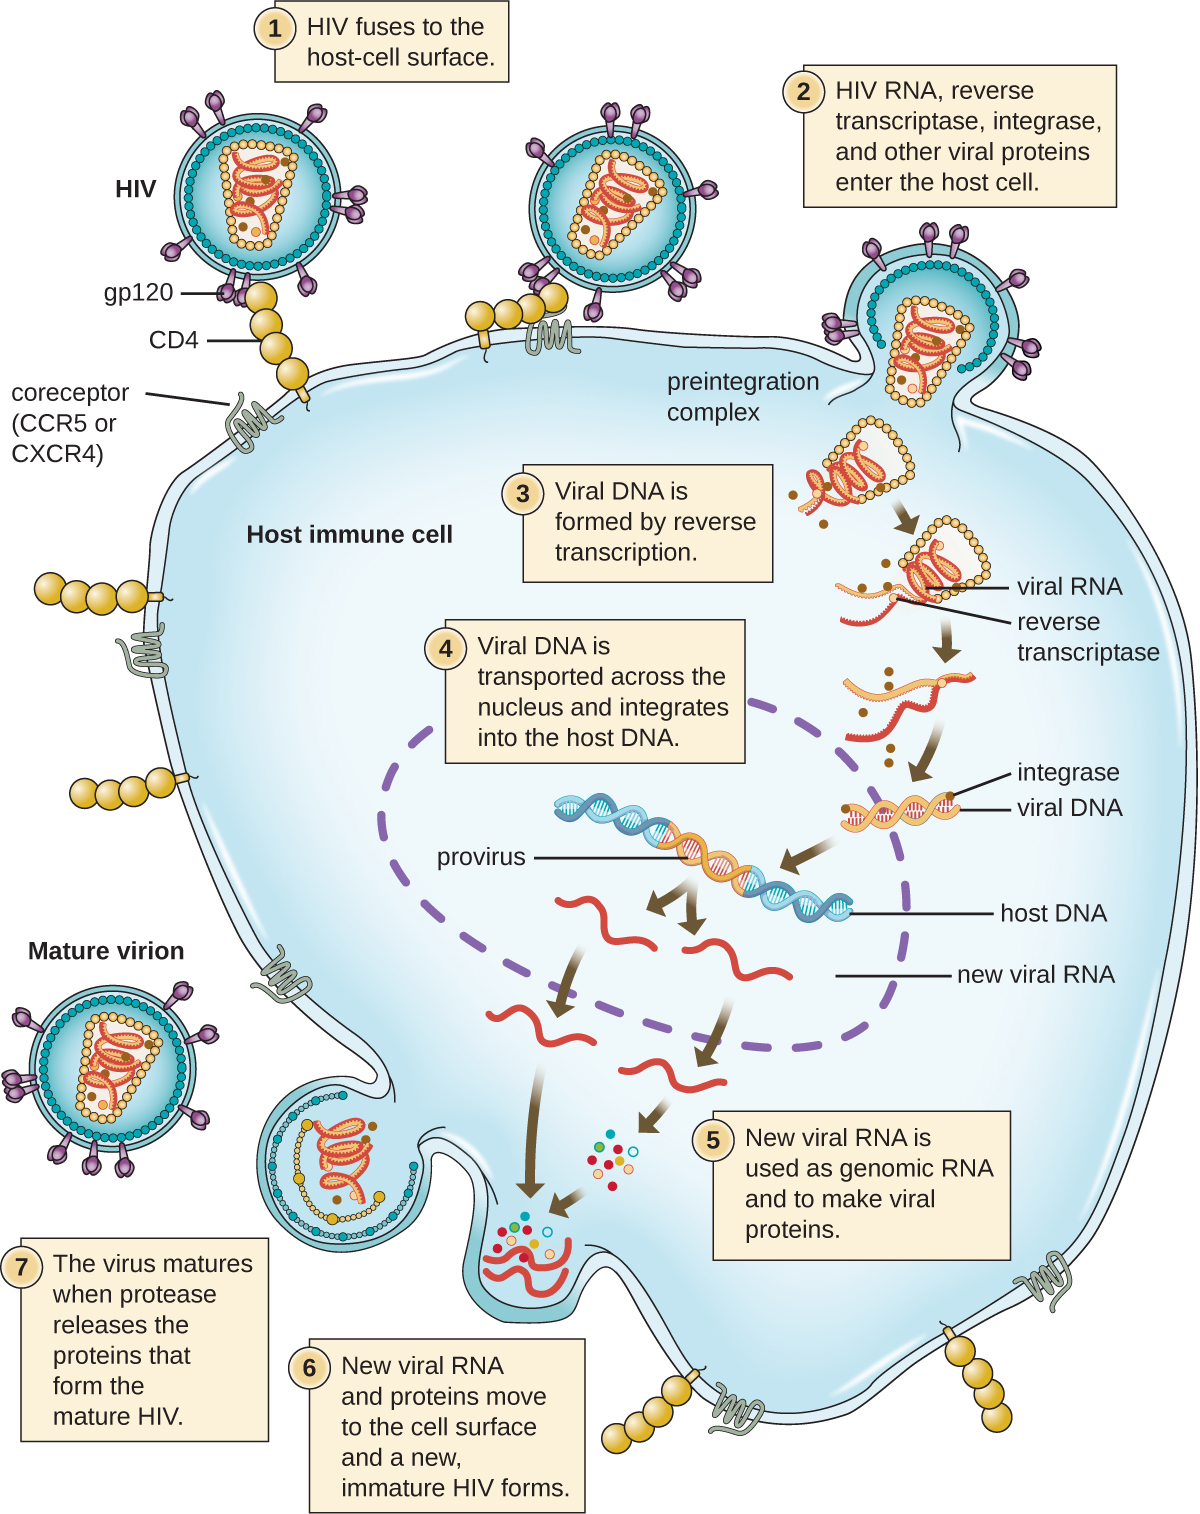 The HIV viral cycle. Step 1: the HIV fuses to the host-cell surface. Specifically, the gp120 proteins on the surface of the virus binds to the CD4. This then binds to a smaller coreceptor (CCR5 or CXCR4). Step 2: HIV RNA, reverse transtriptase, integrase, and other viral proteins enter the host cell. The virus is brought into the host cell and uncoated; both viral RNA and reverse transcriptase are loosed into the cell. Step 3: Viral DNA is formed by reverse transcription. Step 4: Viral DNA is transported across the nucleus and integrates into the host DNA. Integrase found on the viral DNA. The viral DNA in the host DNA is called provirus. Step 5: New viral RNA is used as genomic RNA and to make viral proteins. New viral RNA strands are made and leave the nucleus. Step 6: New viral RNA and proteins move to the cell surface and a new immature HIV forms. The viral is assembled in an outbulging of the host cell. Step 7: The virus matures when protease releases the proteins that form the mature HIV. Mature virion is released.